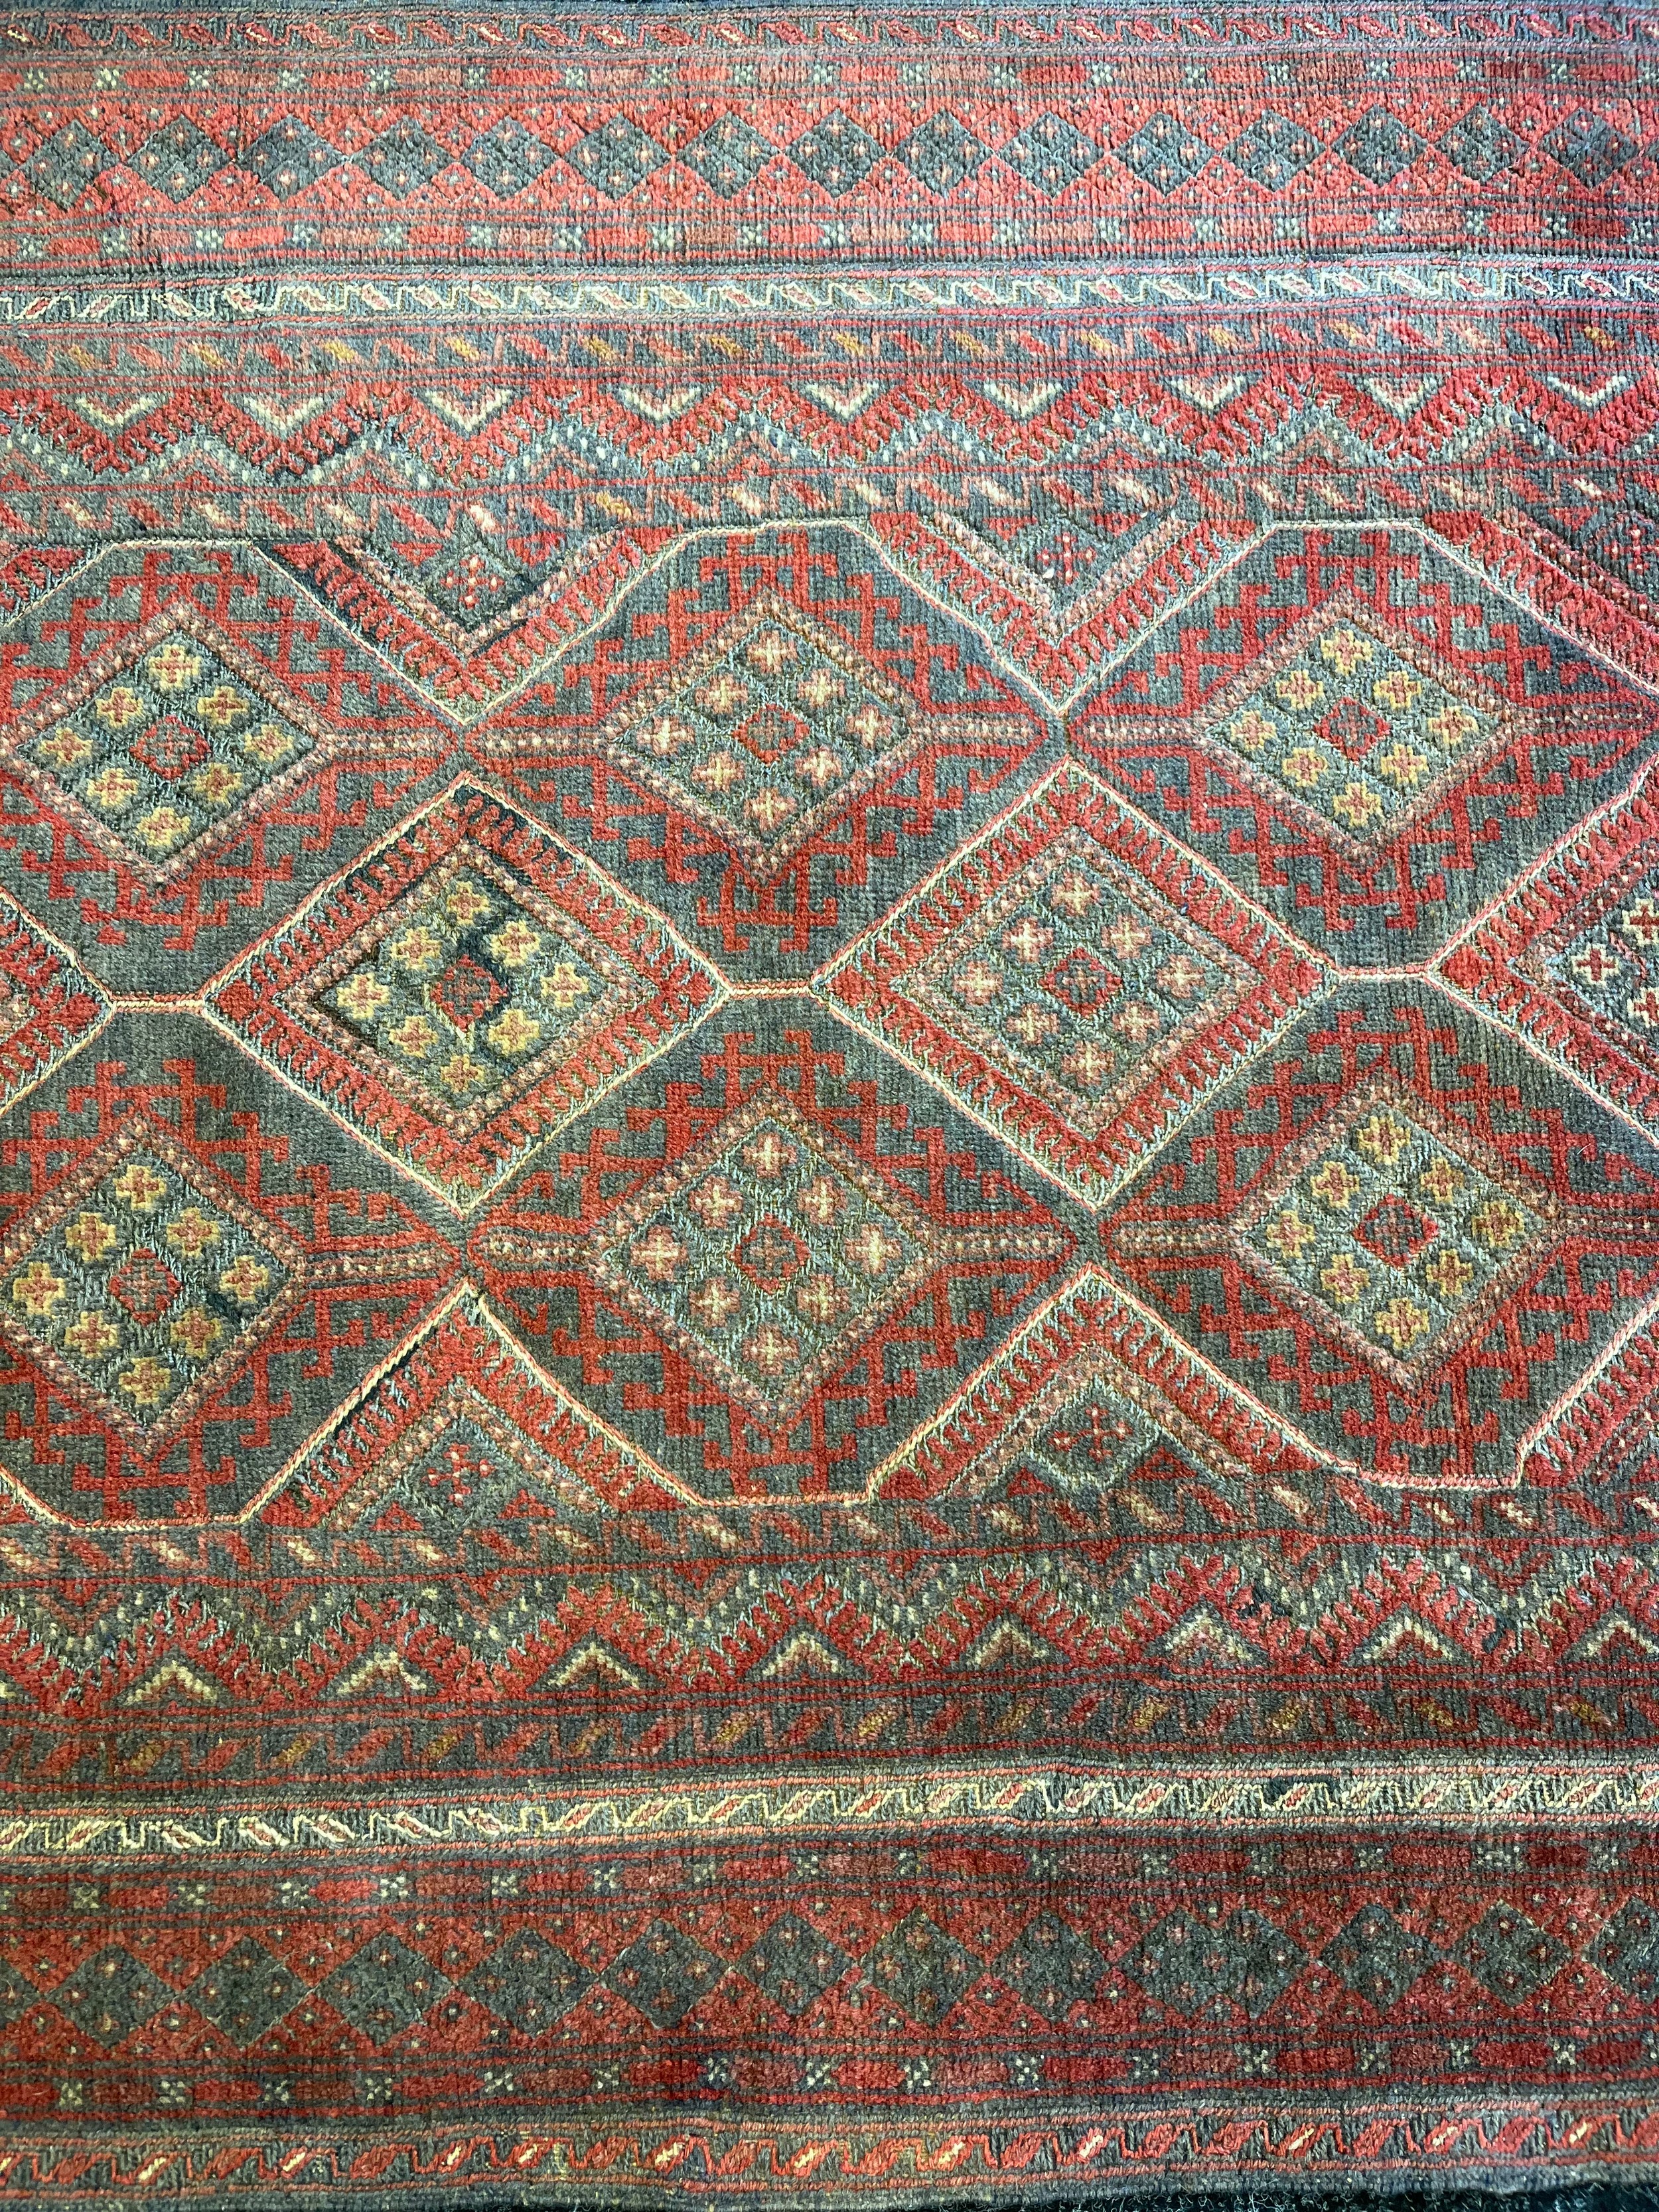 Antique handmade kilm rug, comes with certificate of authenticity [194x121cm] - Image 3 of 7